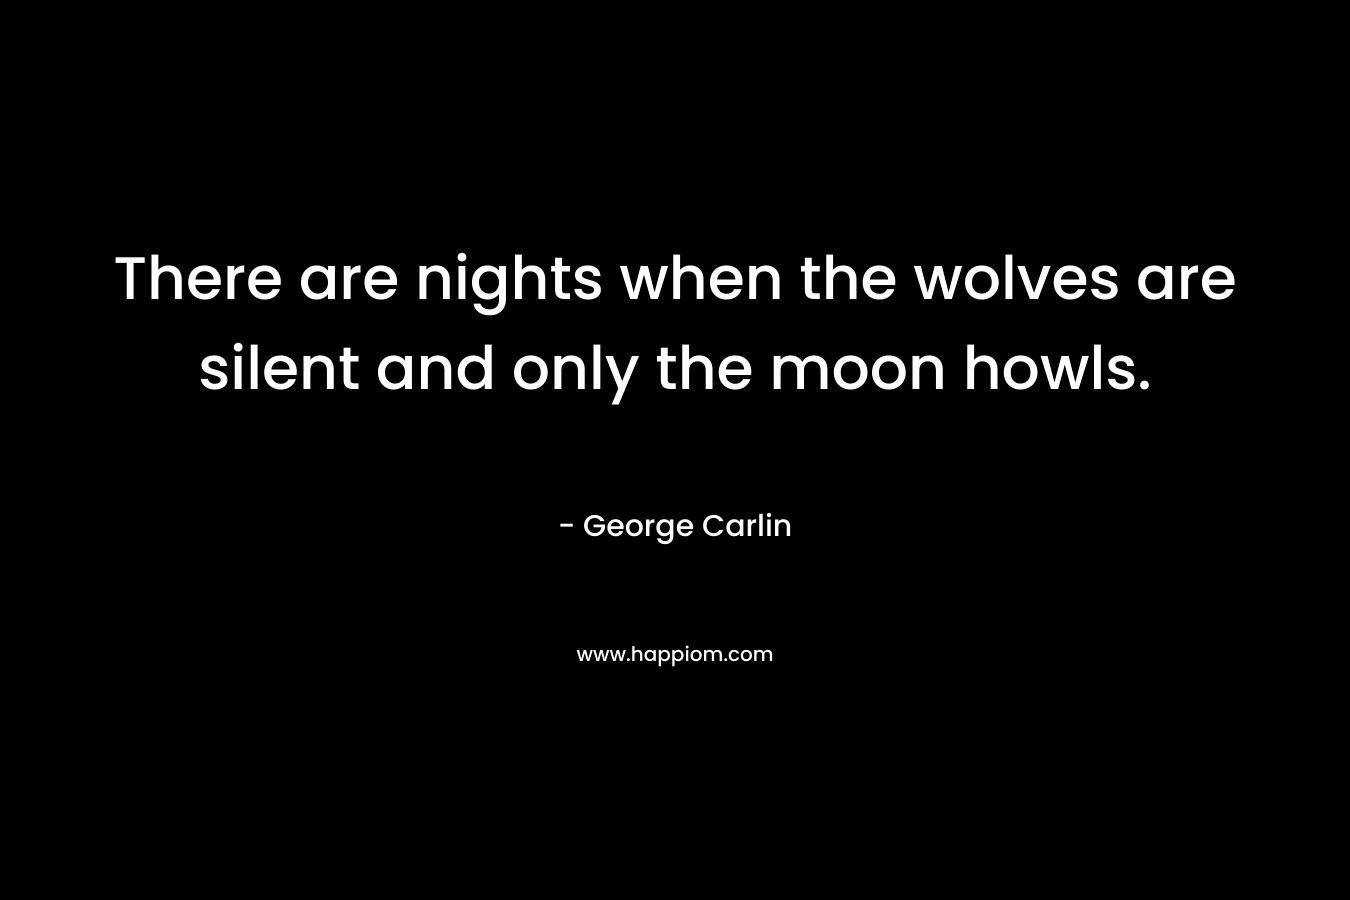 There are nights when the wolves are silent and only the moon howls. – George Carlin